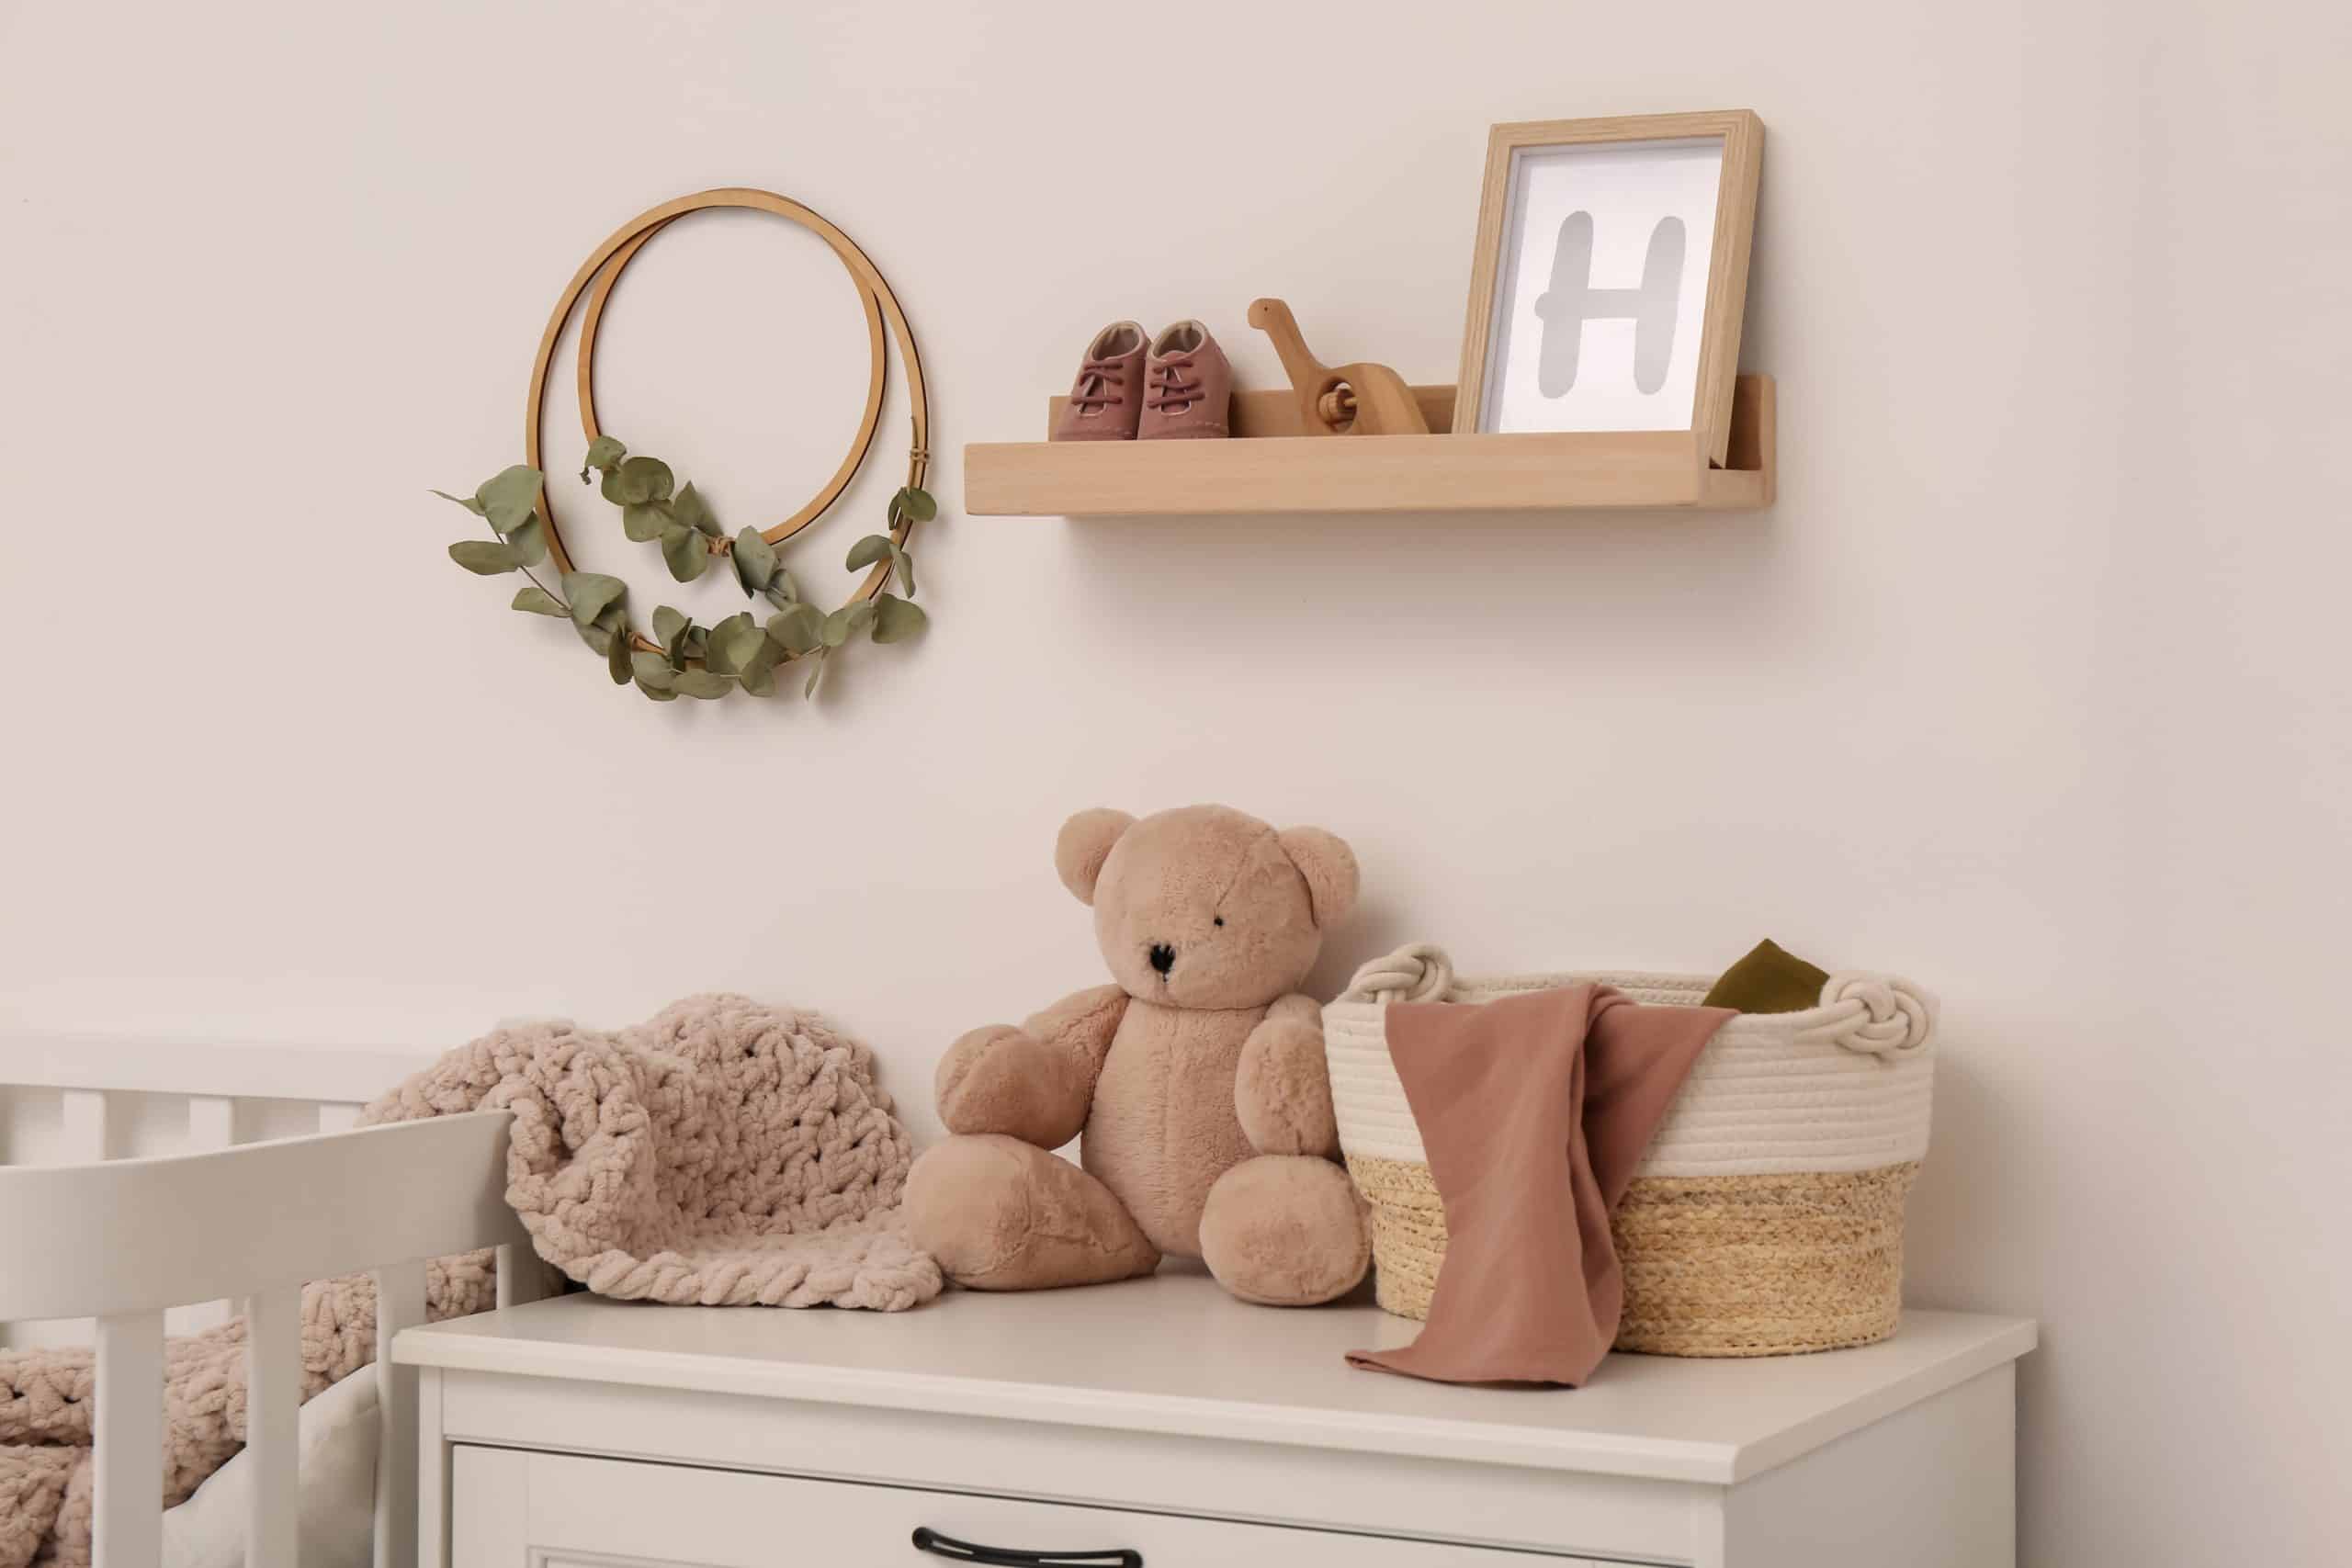 Items of baby furniture spread across the top of a cabinet